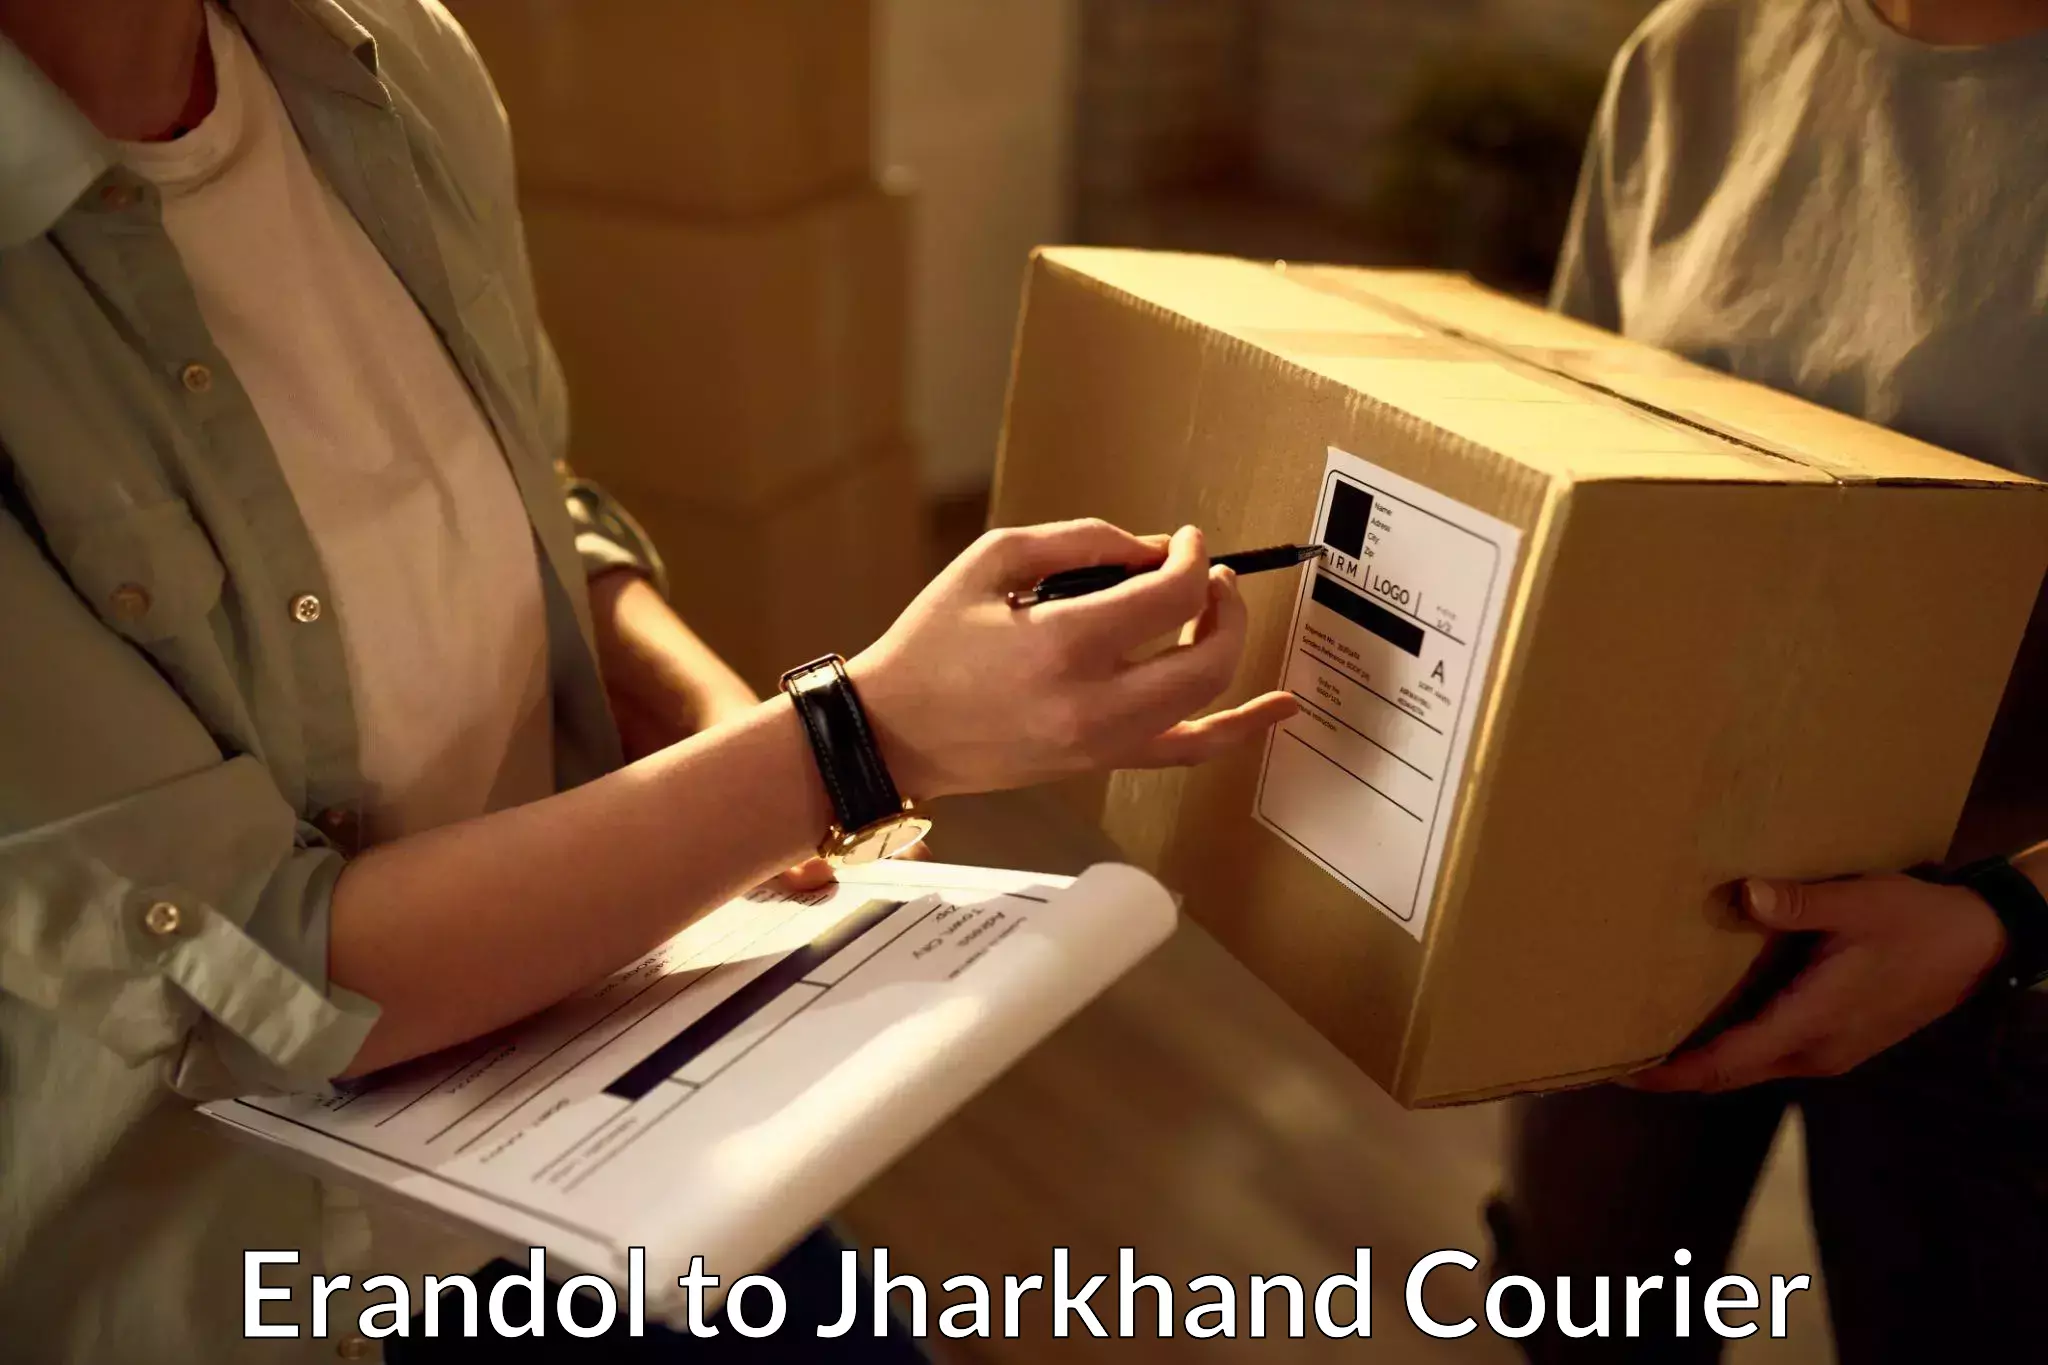 User-friendly delivery service Erandol to Jharkhand